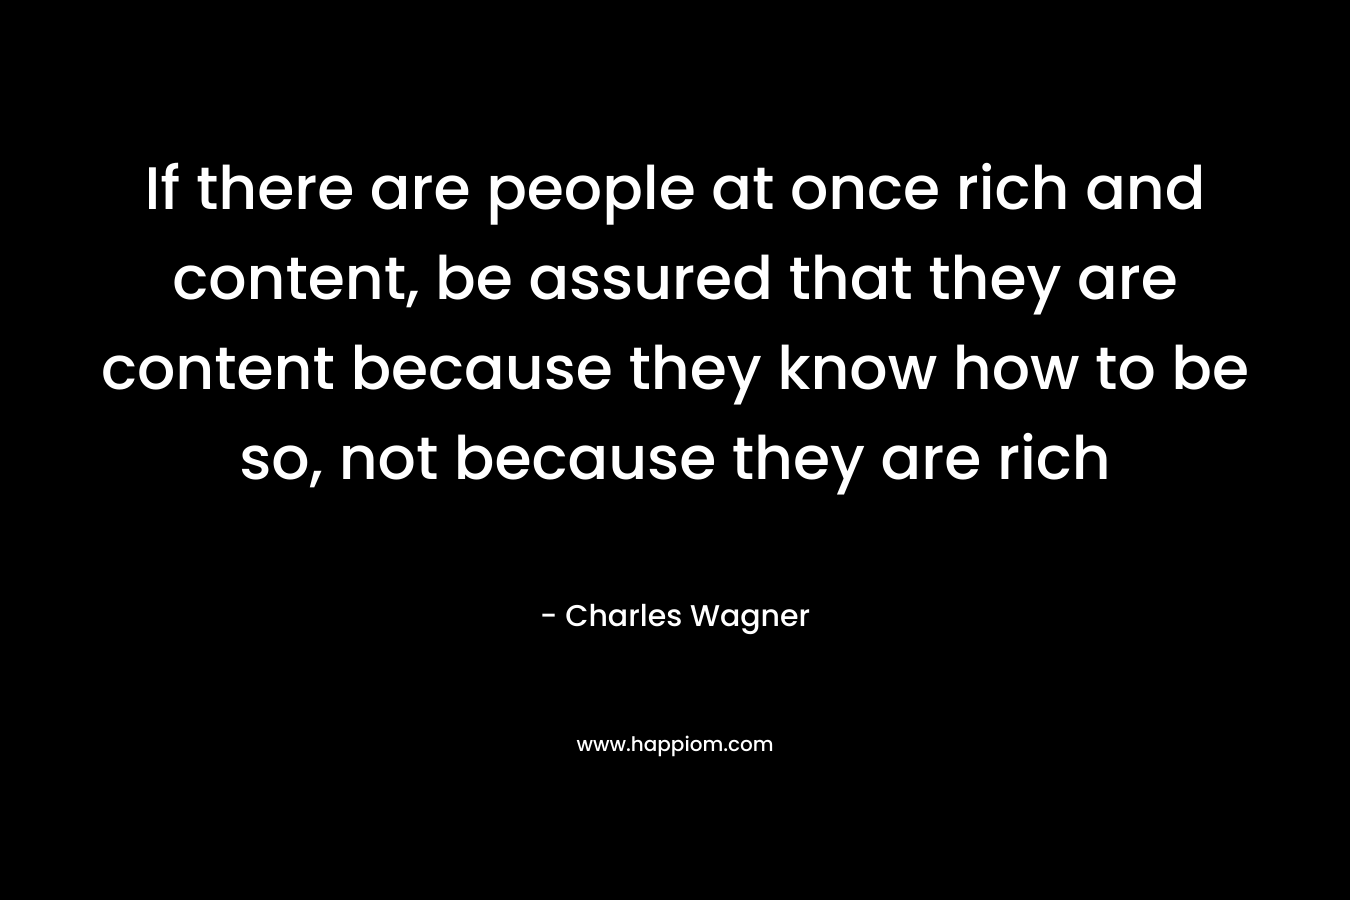 If there are people at once rich and content, be assured that they are content because they know how to be so, not because they are rich – Charles Wagner